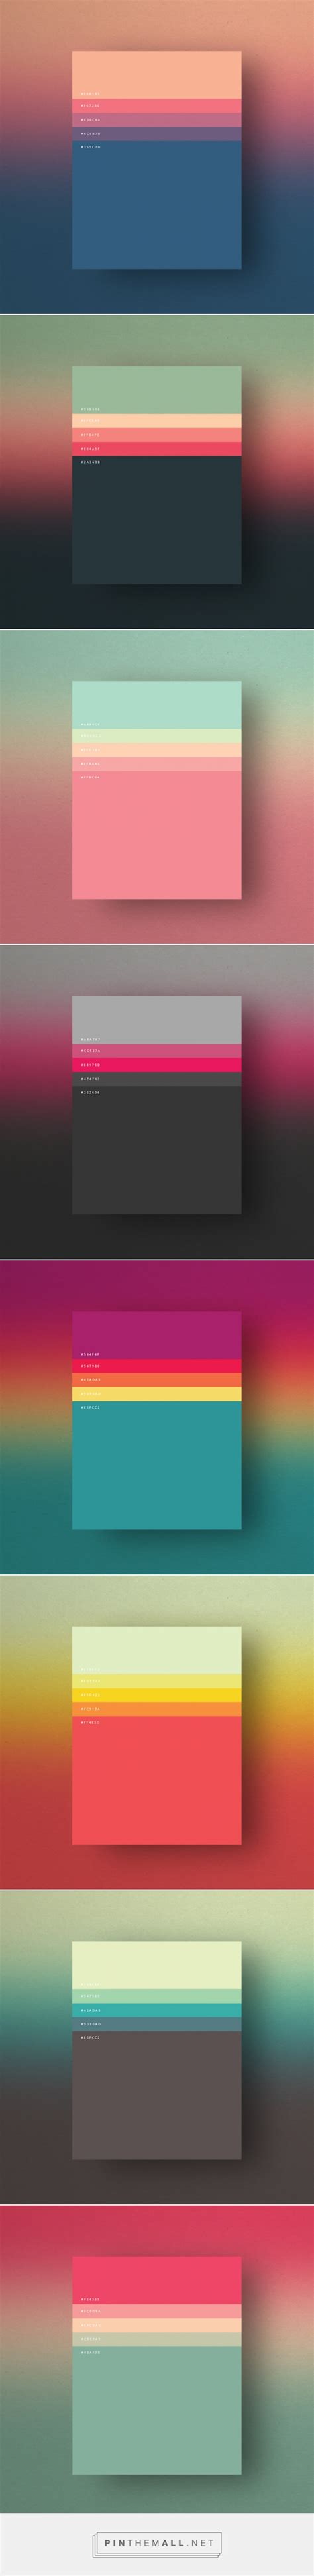 8 Beautiful Color Palettes For Your Next Design Project In 2021 Color